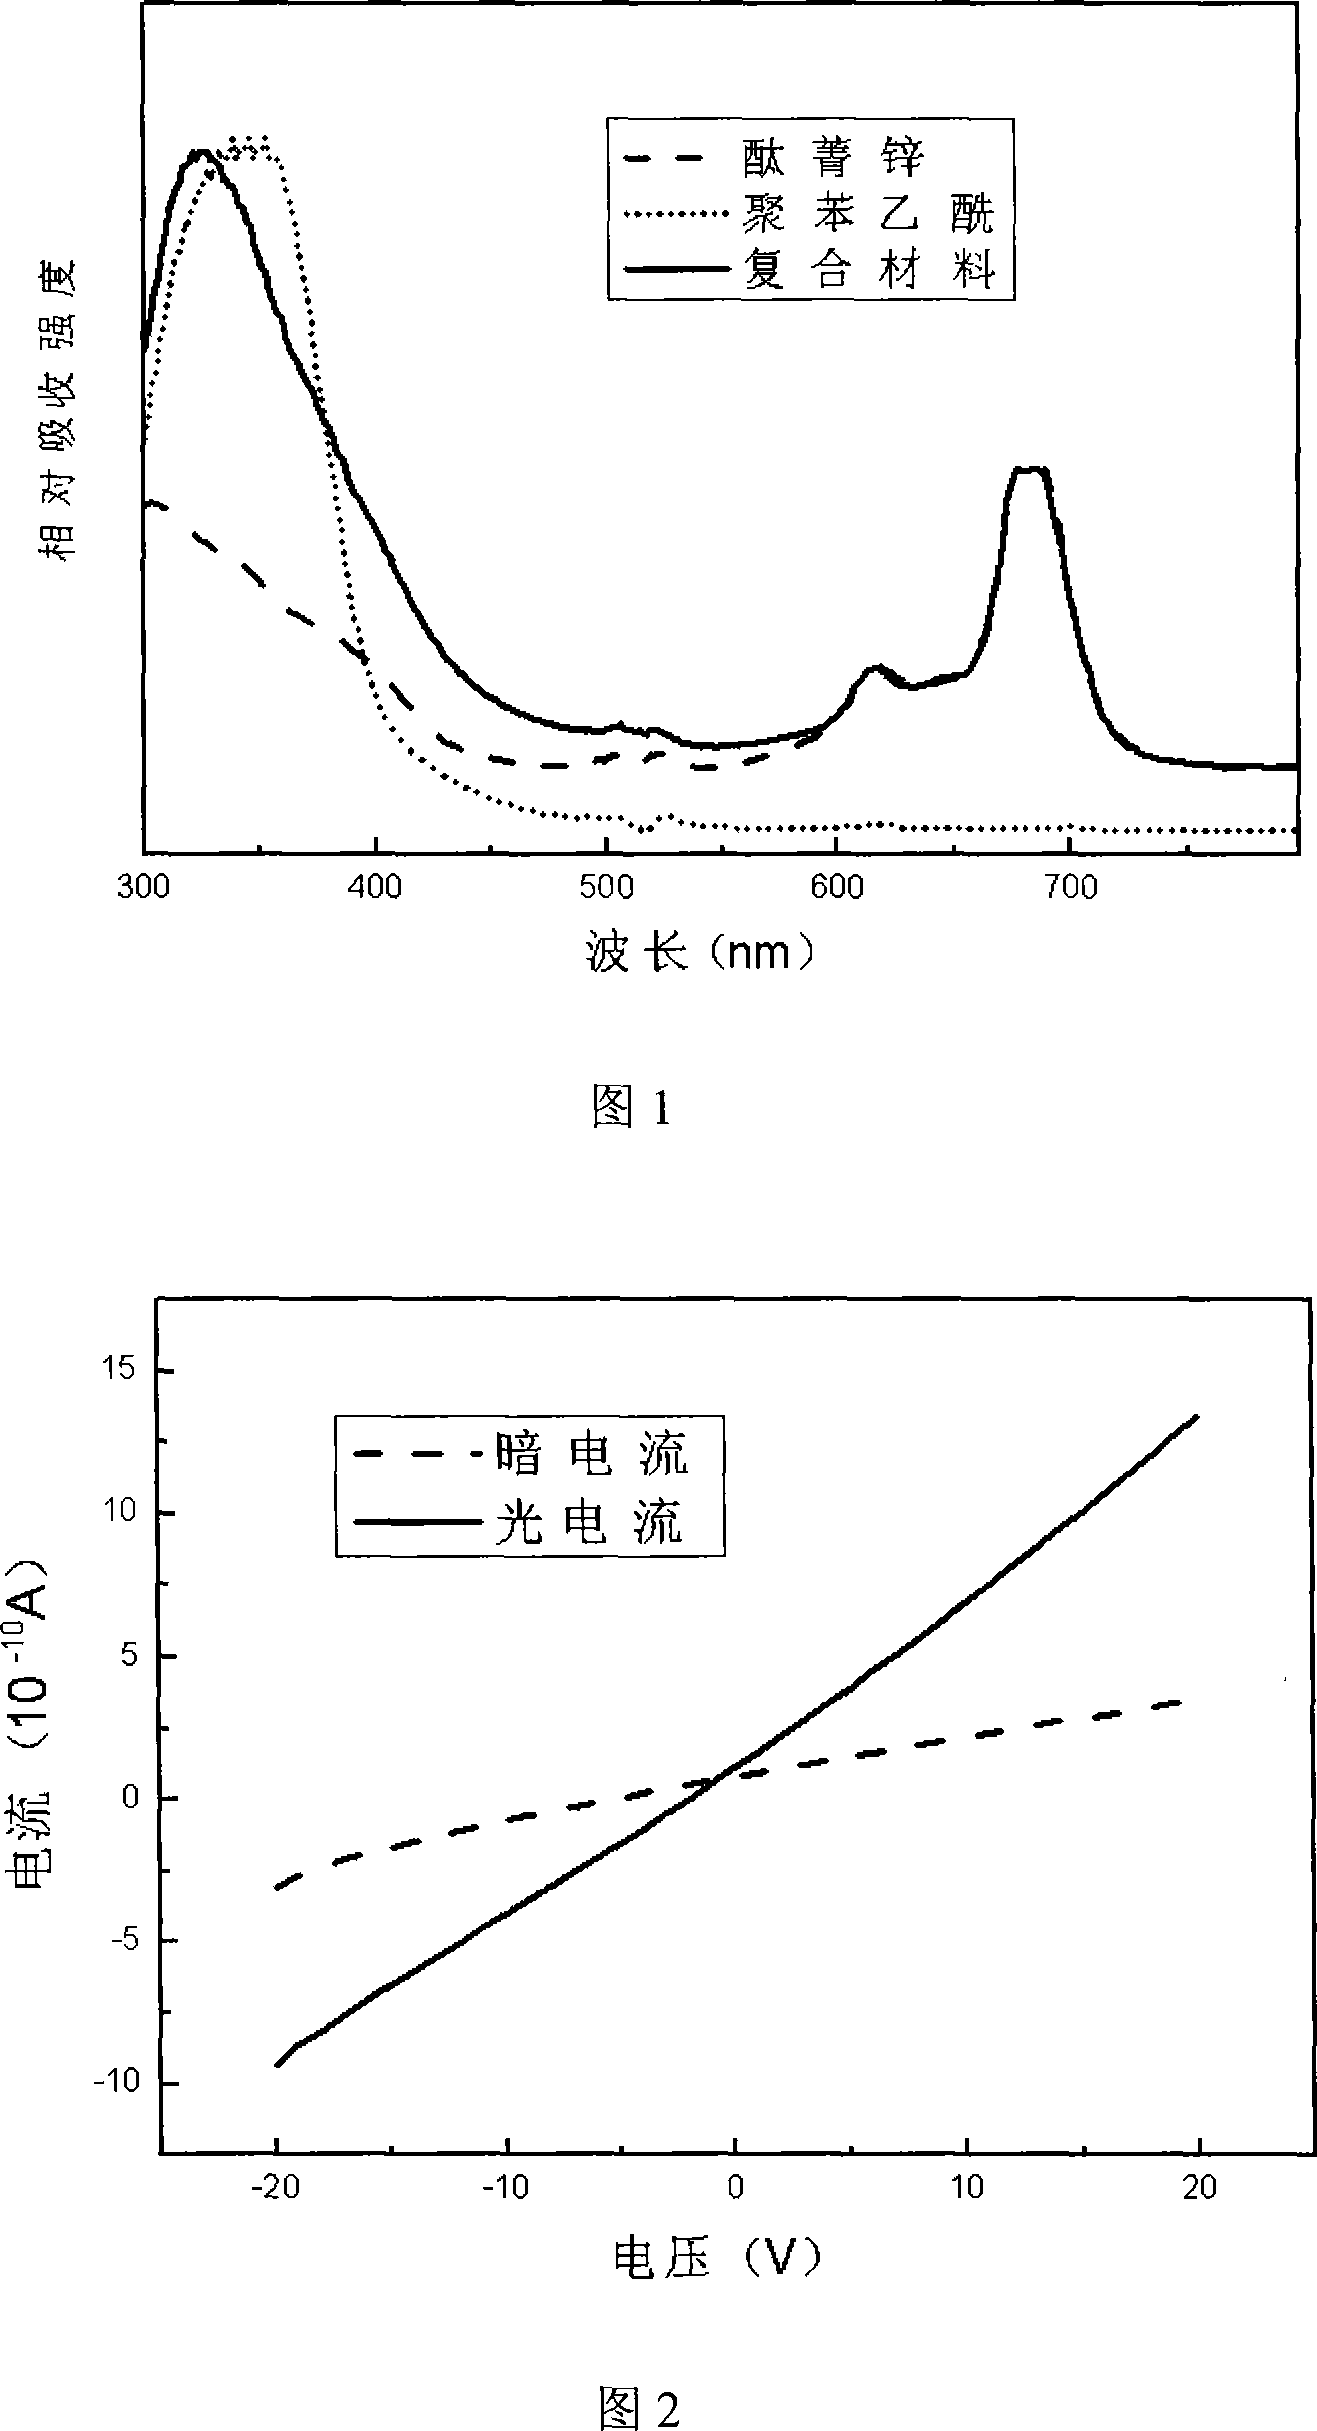 Method for preparing high optical electrical conductibility poly-p-vinylbenzene/phthalocyanine composite material